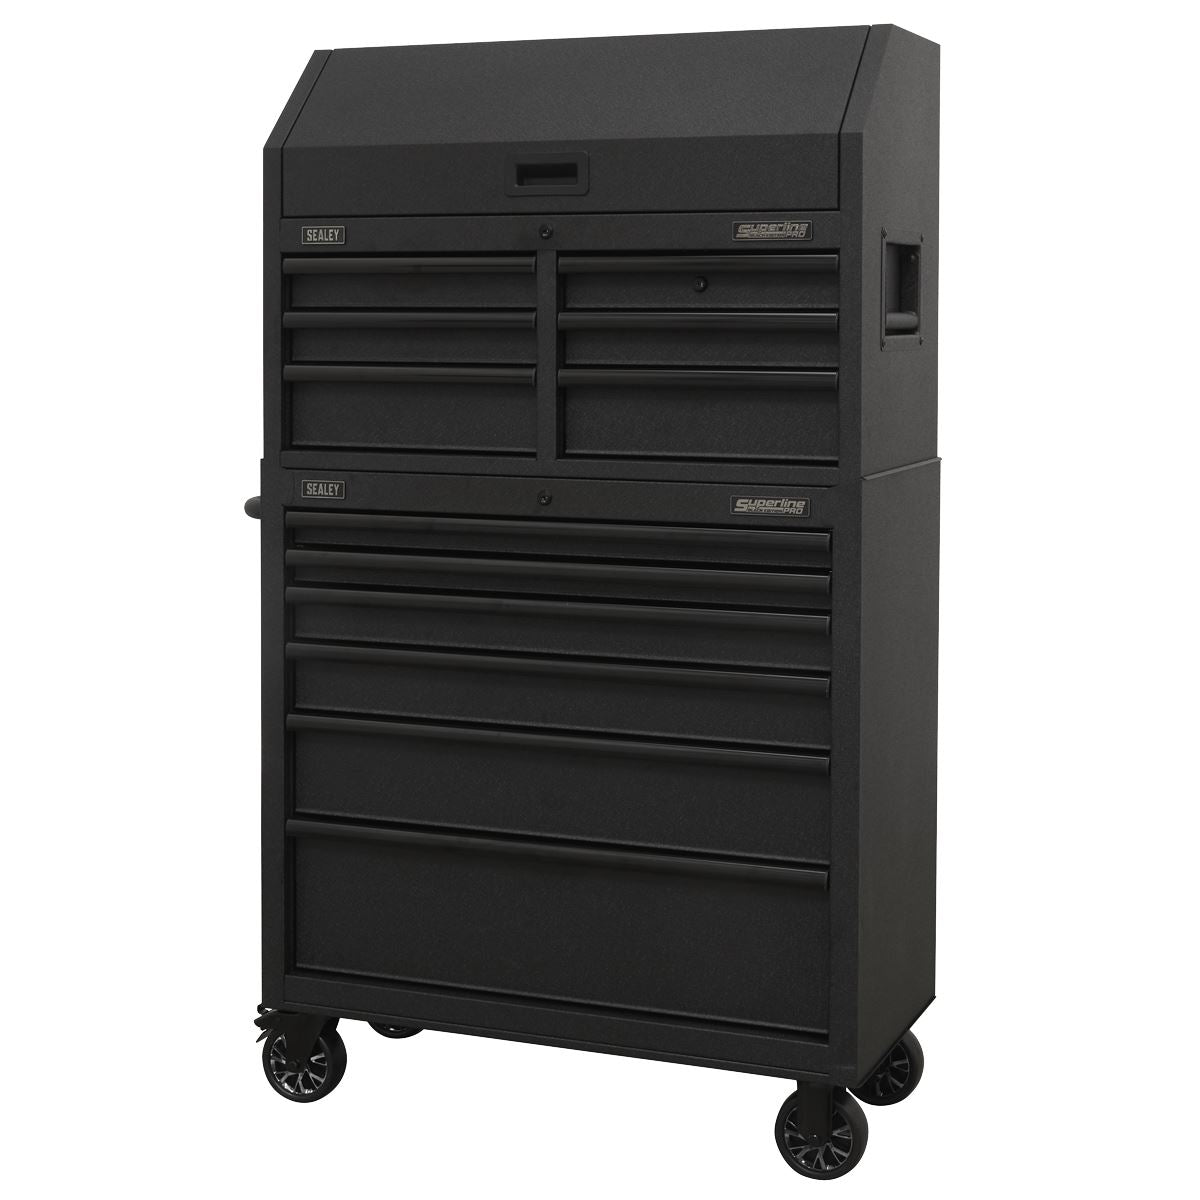 Sealey Superline Pro 12 Drawer Tool Chest Combination with Power Bar